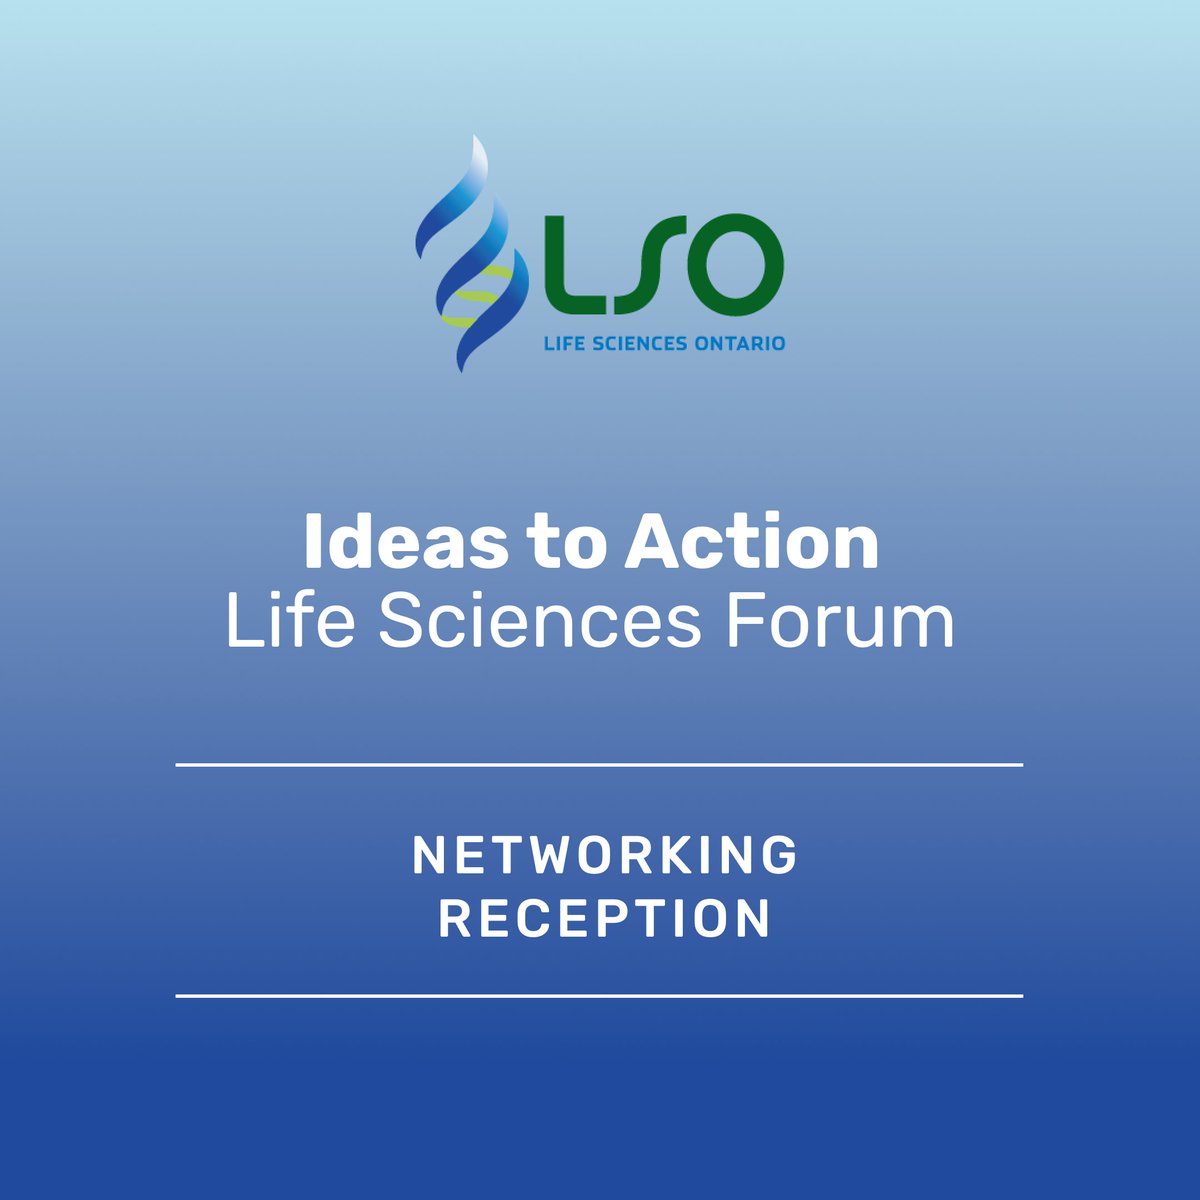 As the @LifeSciencesON #Ideas2Action Life Sciences Forum comes to a close, Shift Health is honoured to be in the presence of community members and newcomers alike. It is time to turn our ideas into action. See you at the networking reception!

LifeSciences #LSO